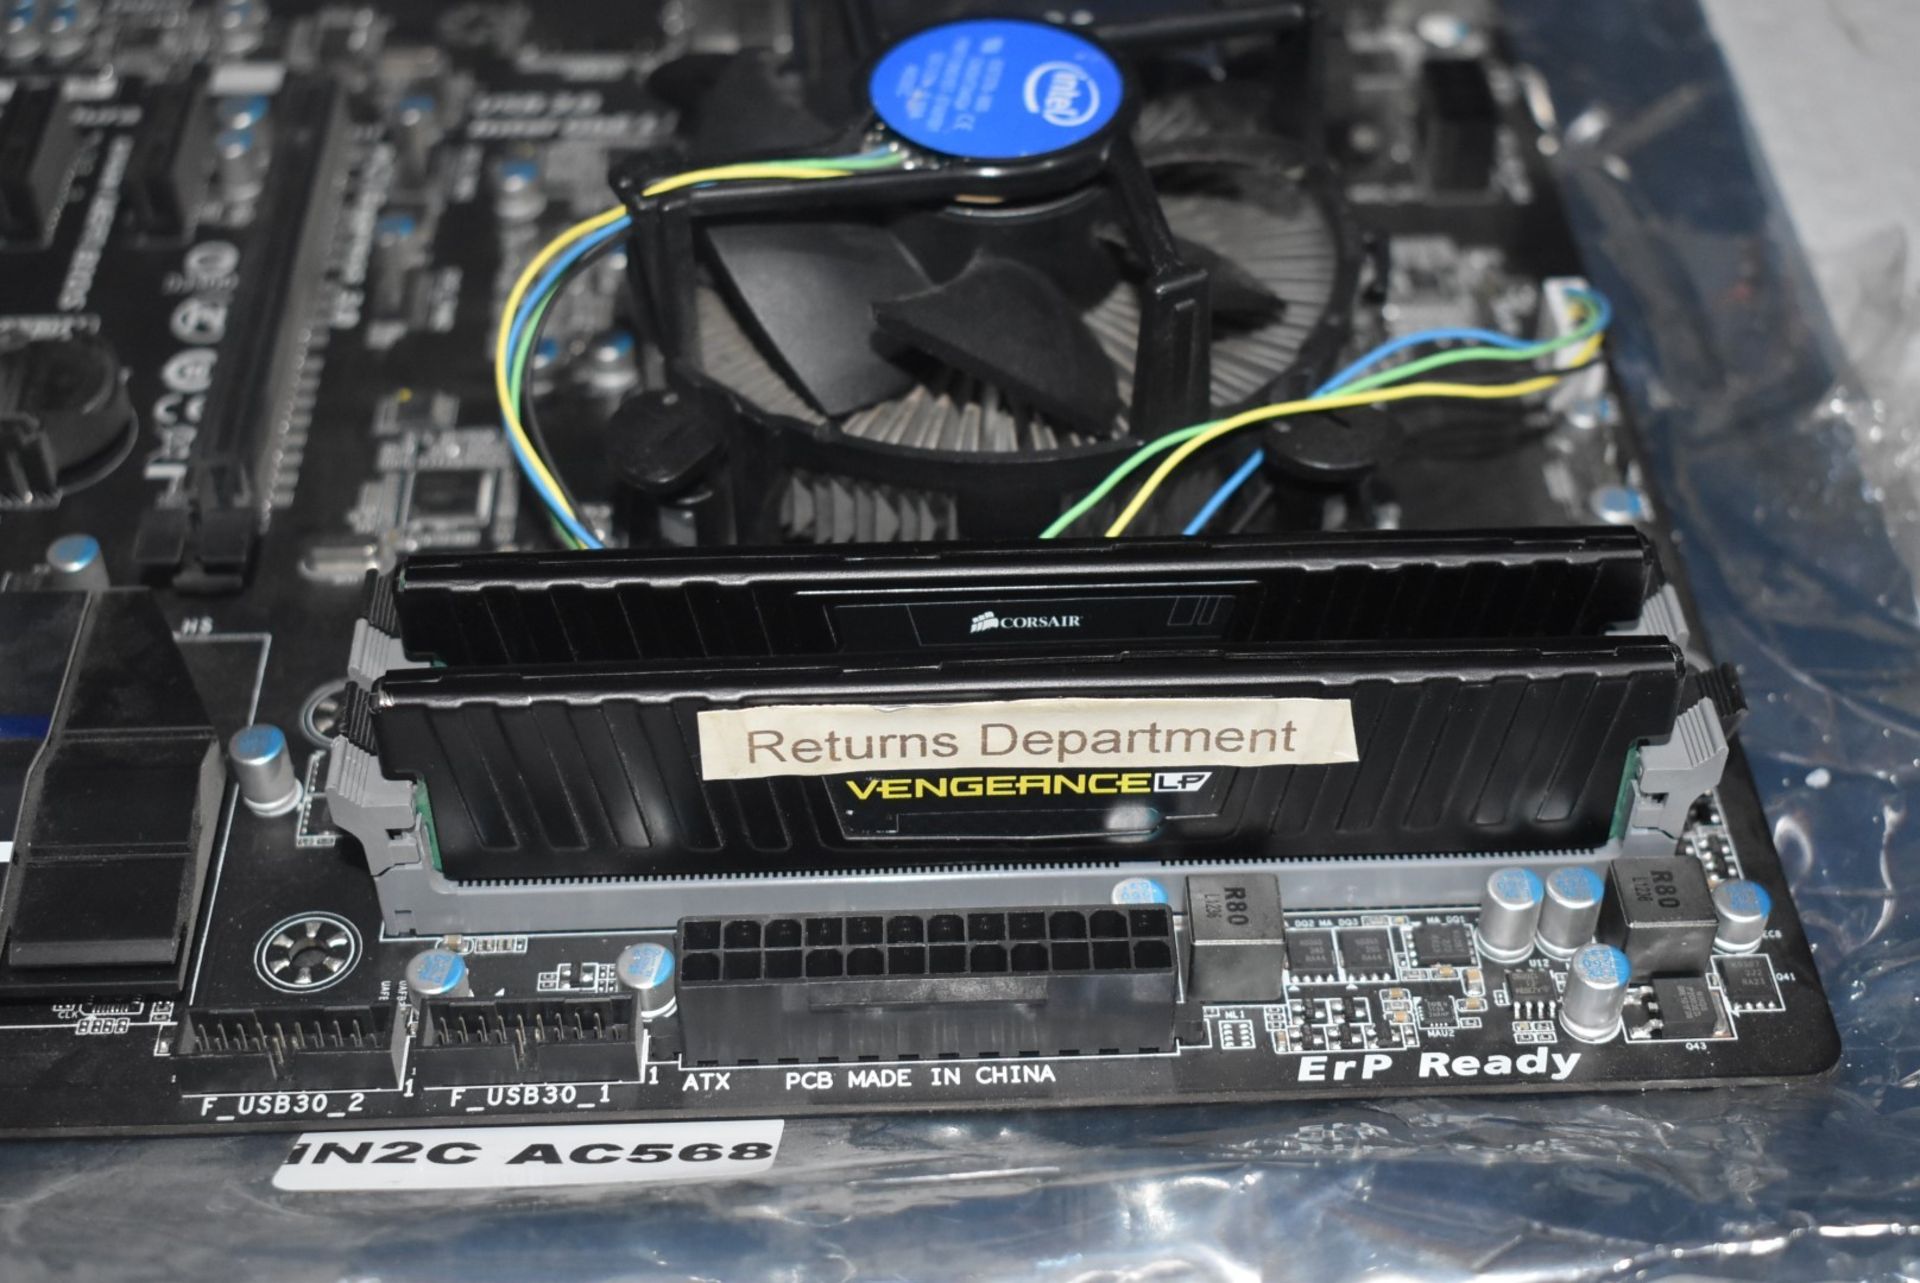 1 x Gigabyte GA-Z87-D3HP Motherboard With an Intel i5-4670k Processor and 4gb Ram - Image 3 of 4